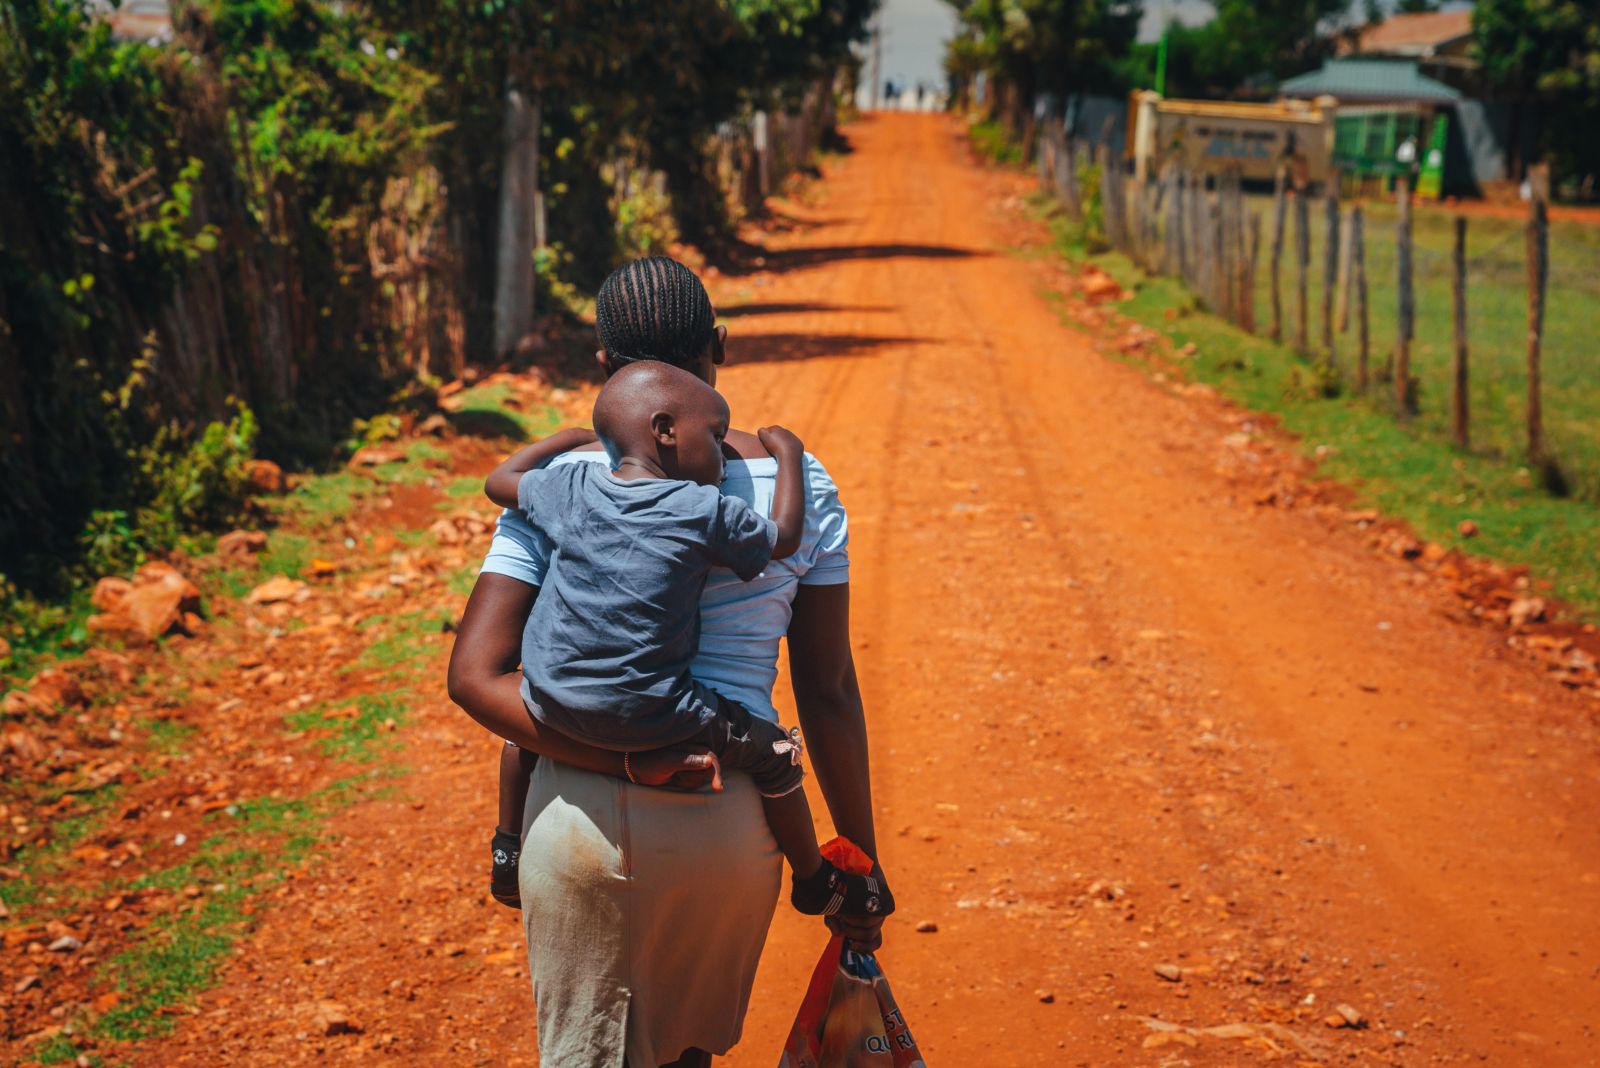 Image of a woman carrying a child on her back while walking